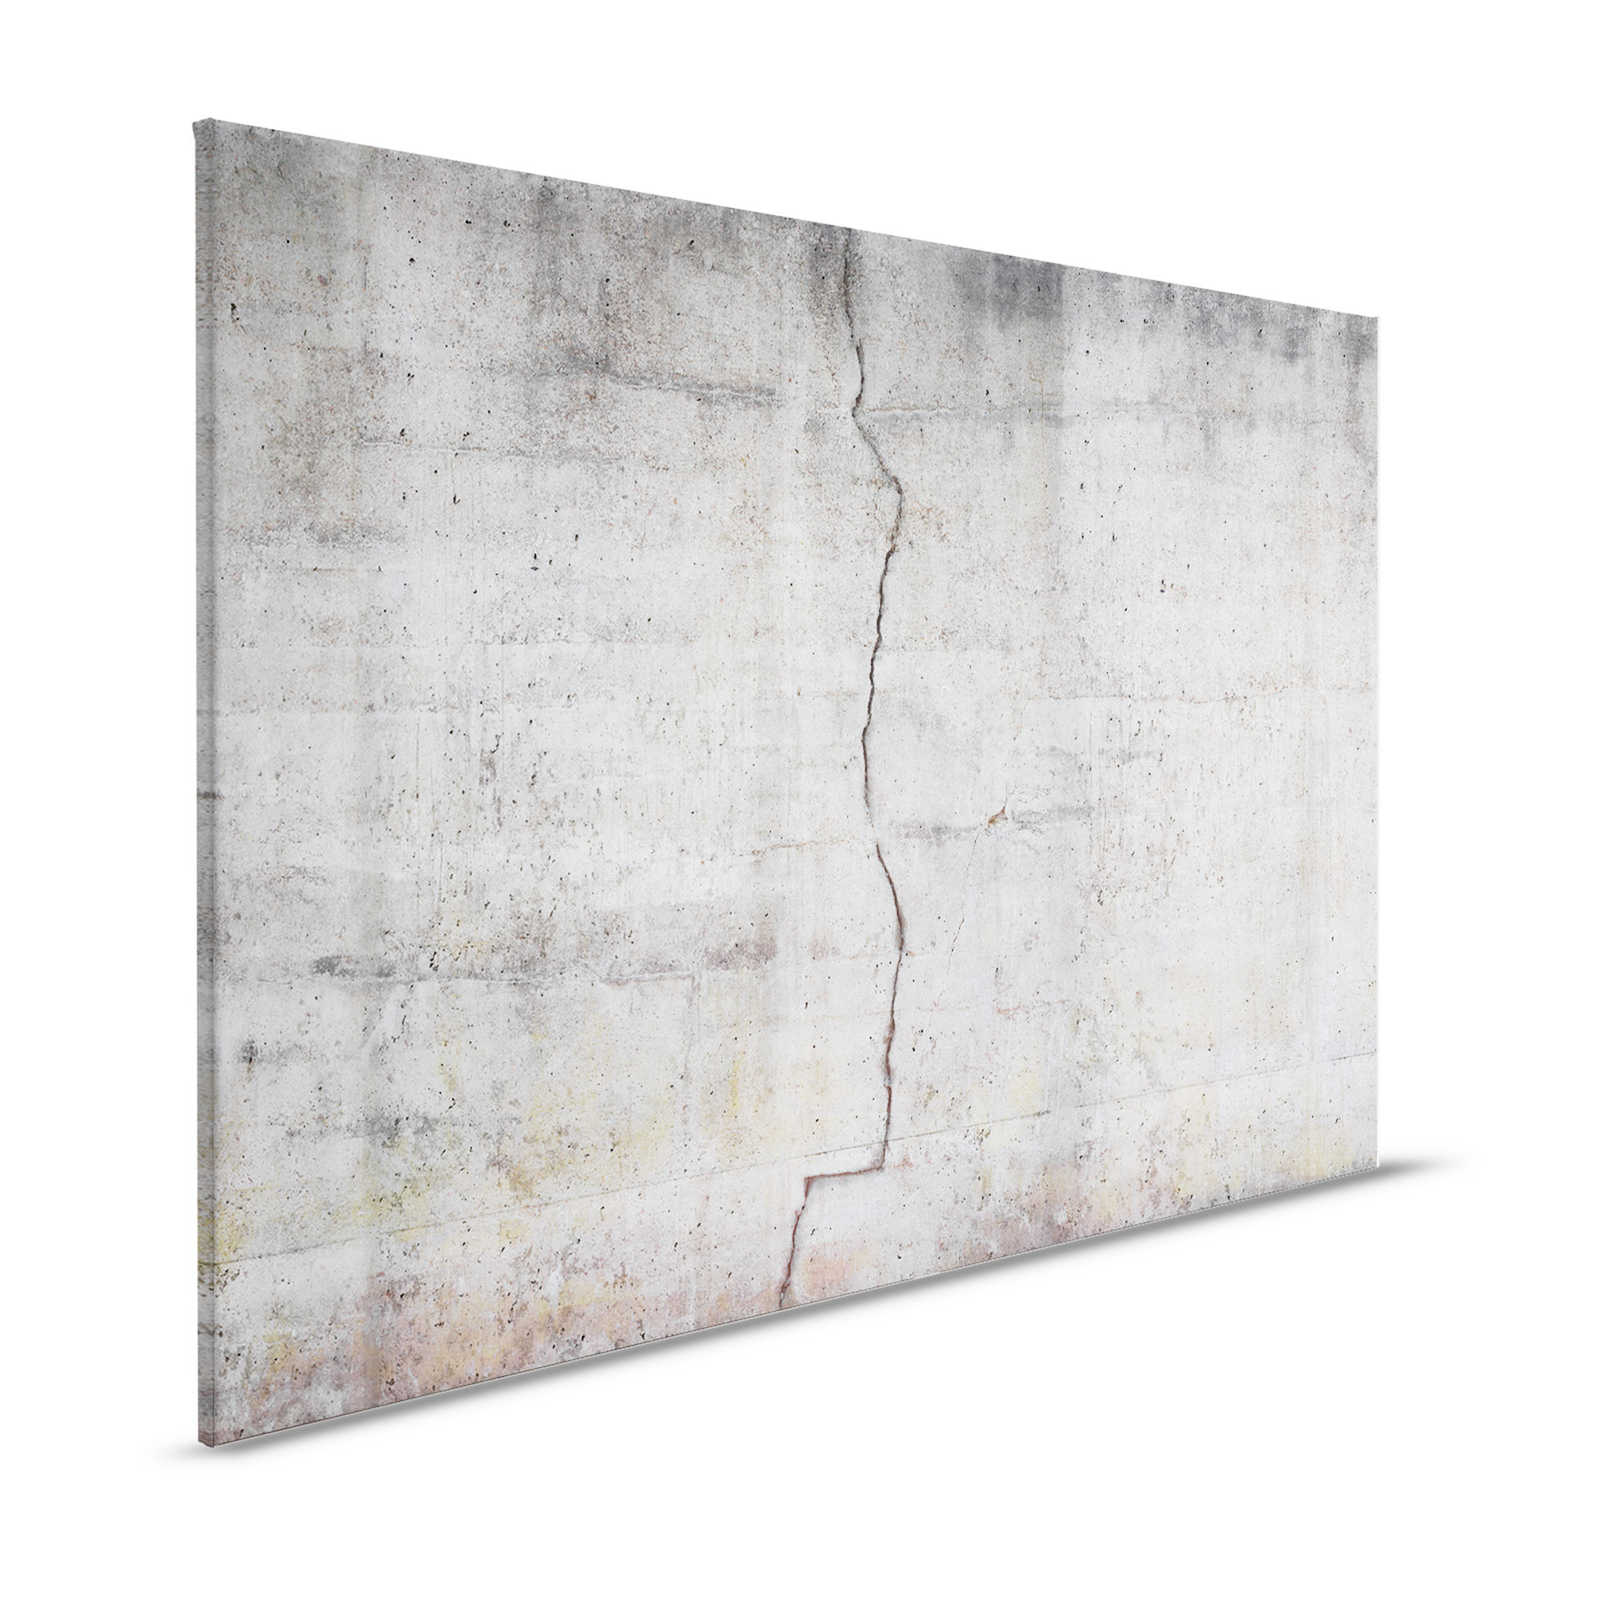 Canvas painting Concrete Wall Optics with Crack - 1.20 m x 0.80 m
